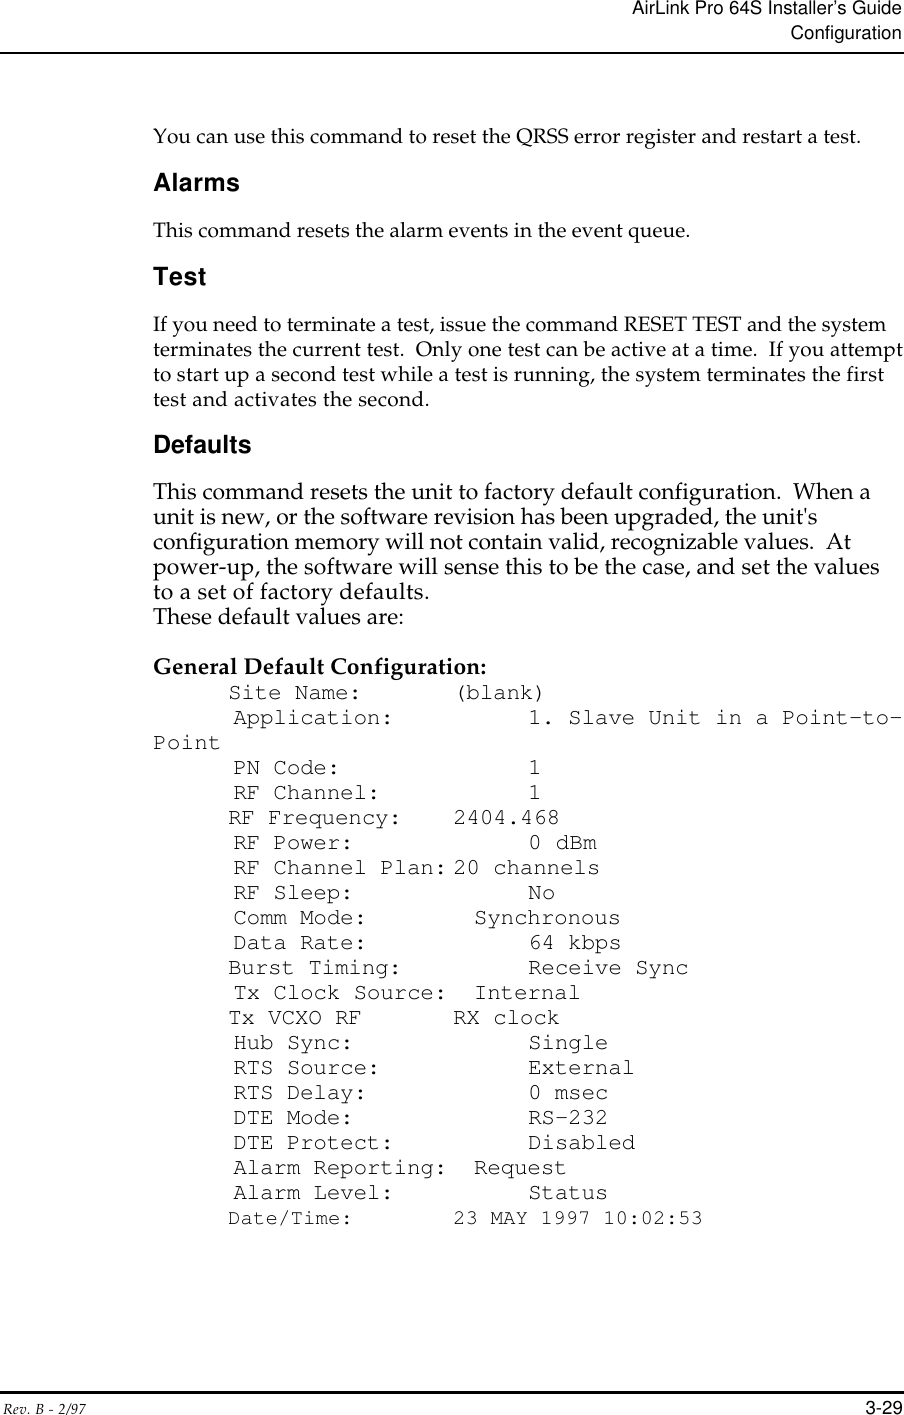 AirLink Pro 64S Installer’s GuideConfigurationRev. B - 2/97 3-29You can use this command to reset the QRSS error register and restart a test.AlarmsThis command resets the alarm events in the event queue.TestIf you need to terminate a test, issue the command RESET TEST and the systemterminates the current test.  Only one test can be active at a time.  If you attemptto start up a second test while a test is running, the system terminates the firsttest and activates the second.DefaultsThis command resets the unit to factory default configuration.  When aunit is new, or the software revision has been upgraded, the unit&apos;sconfiguration memory will not contain valid, recognizable values.  Atpower-up, the software will sense this to be the case, and set the valuesto a set of factory defaults.These default values are:General Default Configuration:       Site Name: (blank)      Application:      1. Slave Unit in a Point-to-Point      PN Code:          1      RF Channel: 1RF Frequency: 2404.468      RF Power:         0 dBm      RF Channel Plan: 20 channels      RF Sleep:         No      Comm Mode:        Synchronous      Data Rate:        64 kbpsBurst Timing:     Receive Sync      Tx Clock Source:  InternalTx VCXO RF RX clock      Hub Sync:         Single      RTS Source:       External      RTS Delay:        0 msec      DTE Mode:         RS-232      DTE Protect:      Disabled      Alarm Reporting:  Request      Alarm Level:      Status      Date/Time:        23 MAY 1997 10:02:53